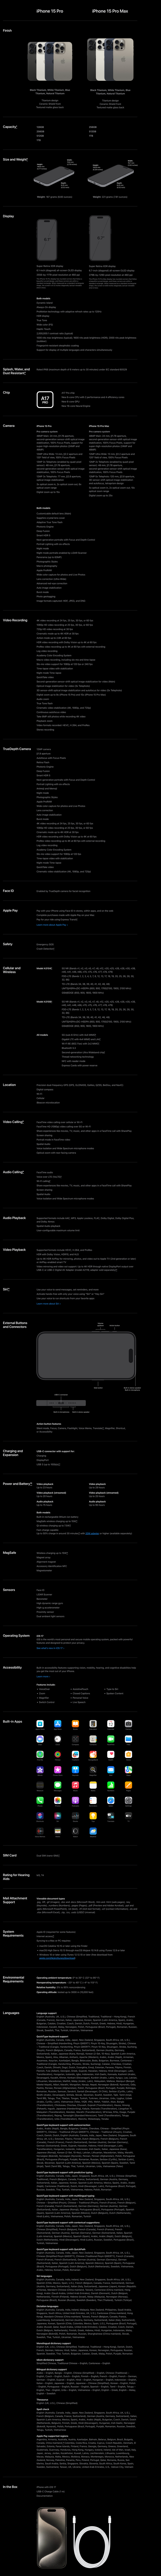 FireShot Capture 005 - iPhone 15 Pro and 15 Pro Max - Technical Specifications - Apple (HK)_ - www-apple-com.png